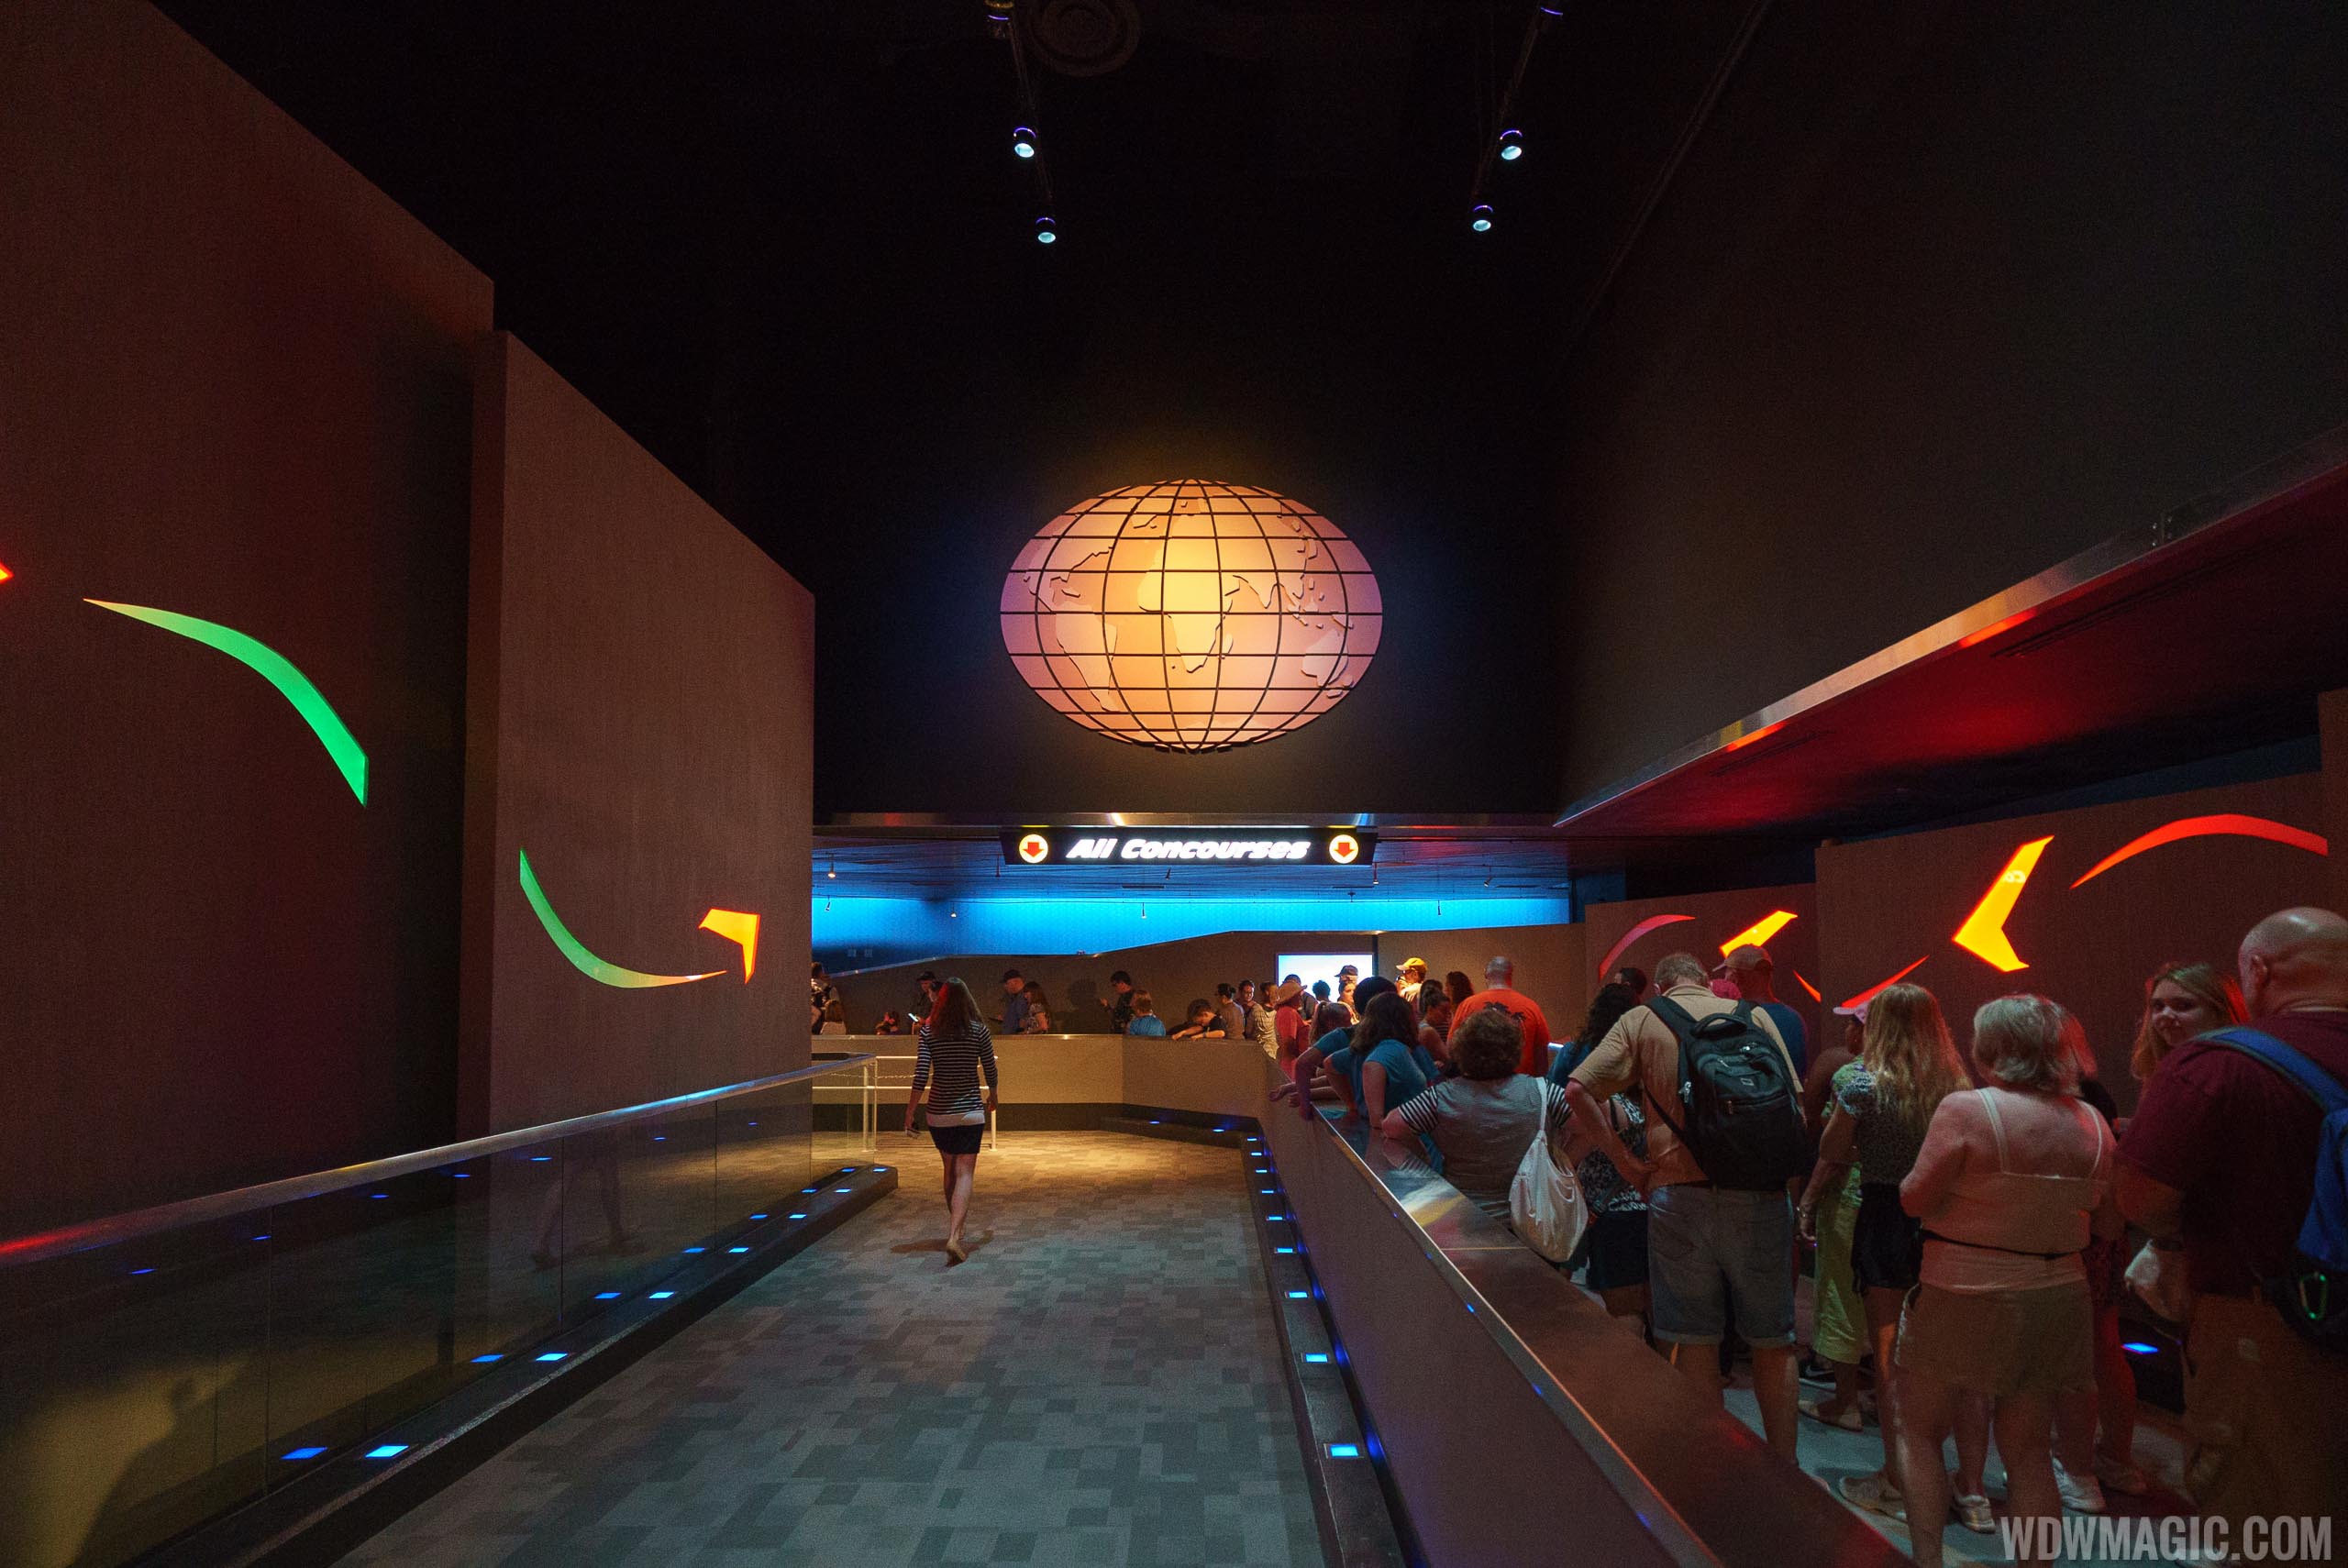 PHOTOS Soarin' reopens at Epcot with third theater and new projectors